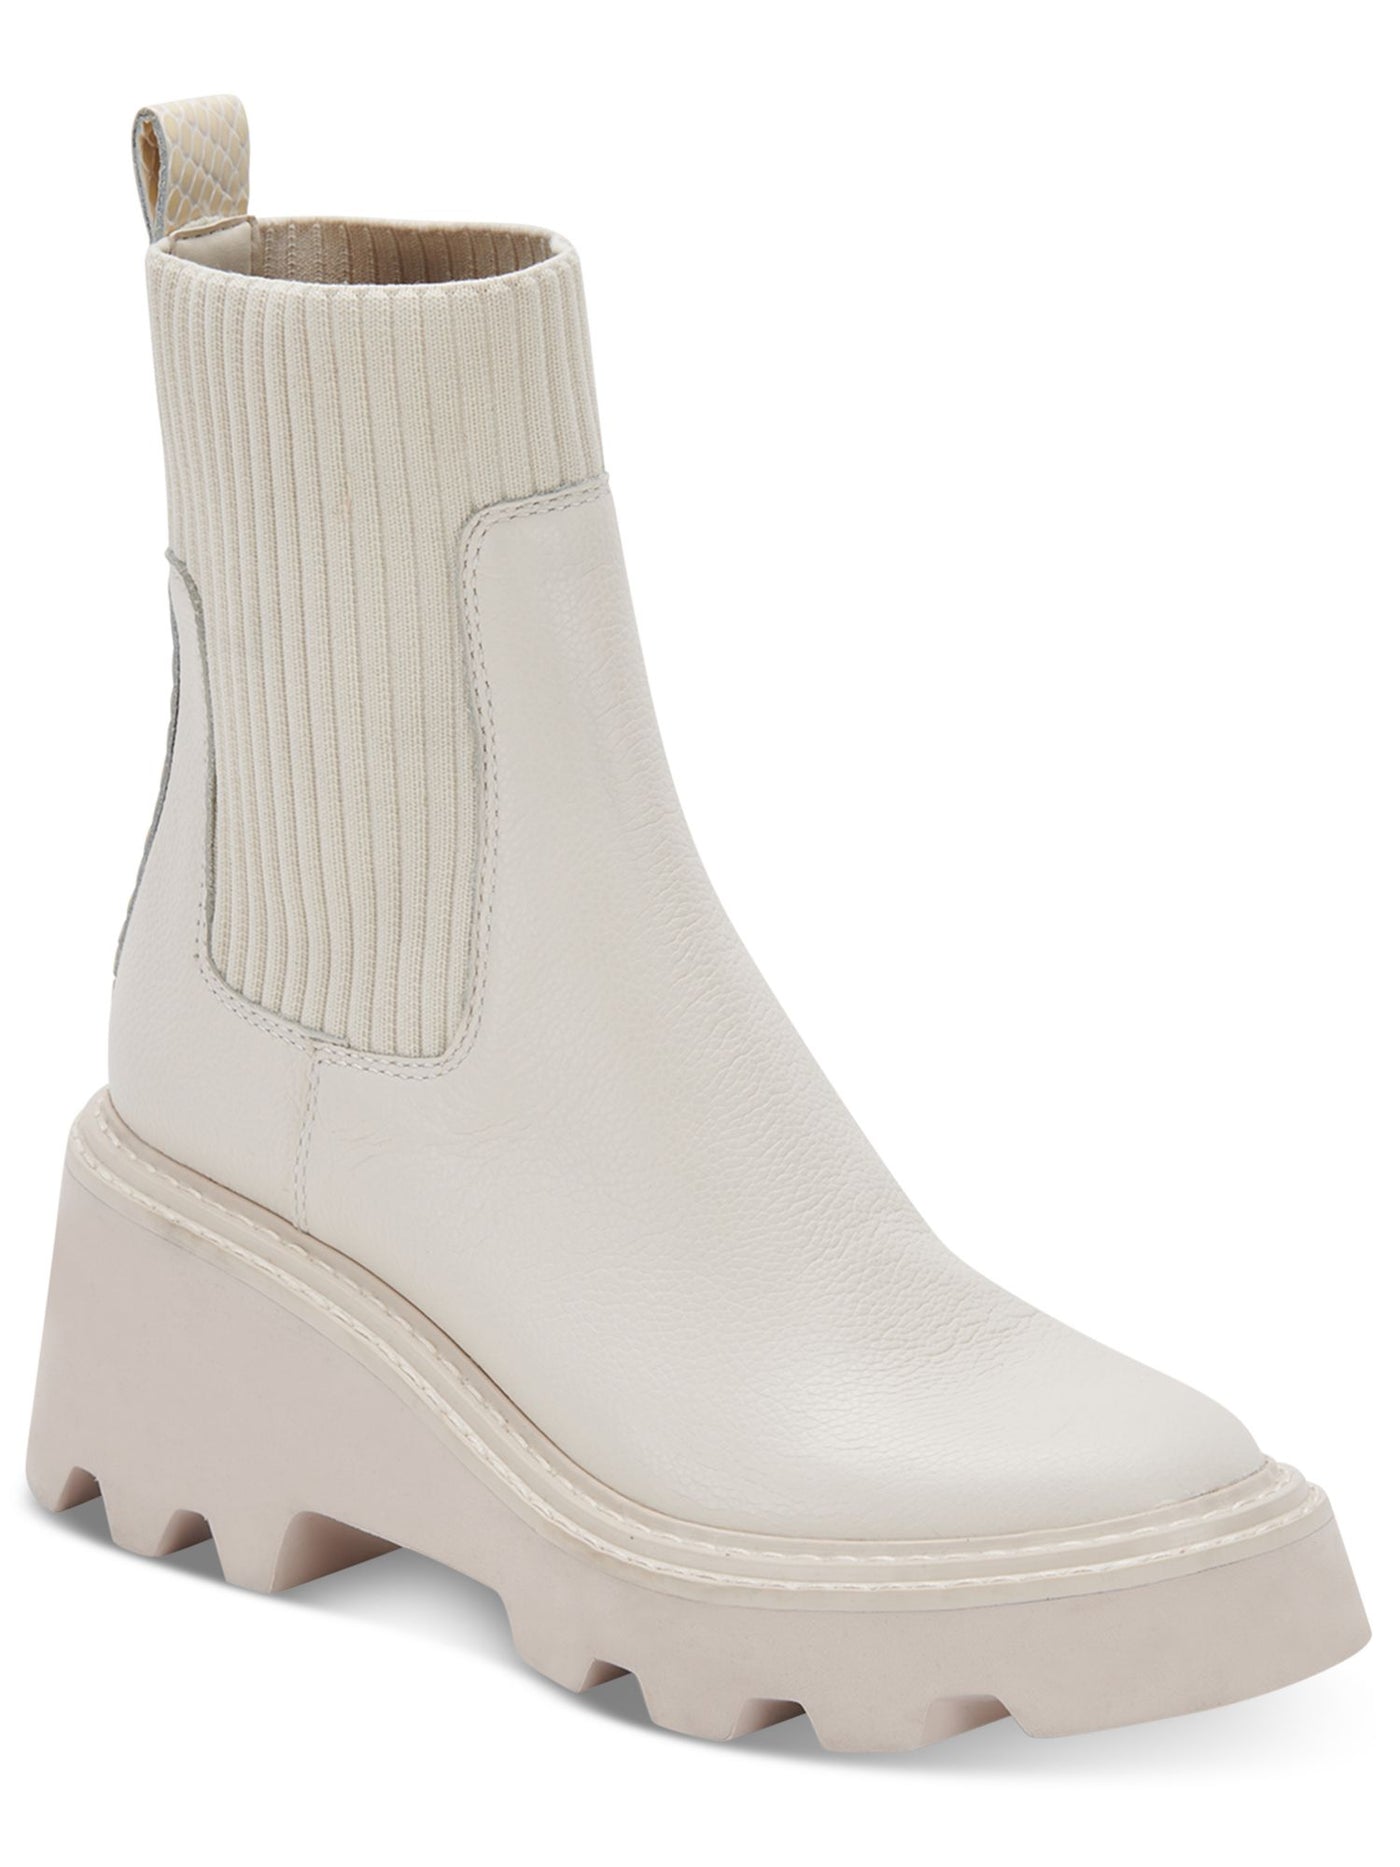 DOLCE VITA Womens Ivory Goring Treaded Hoven Round Toe Wedge Leather Booties 8.5 M